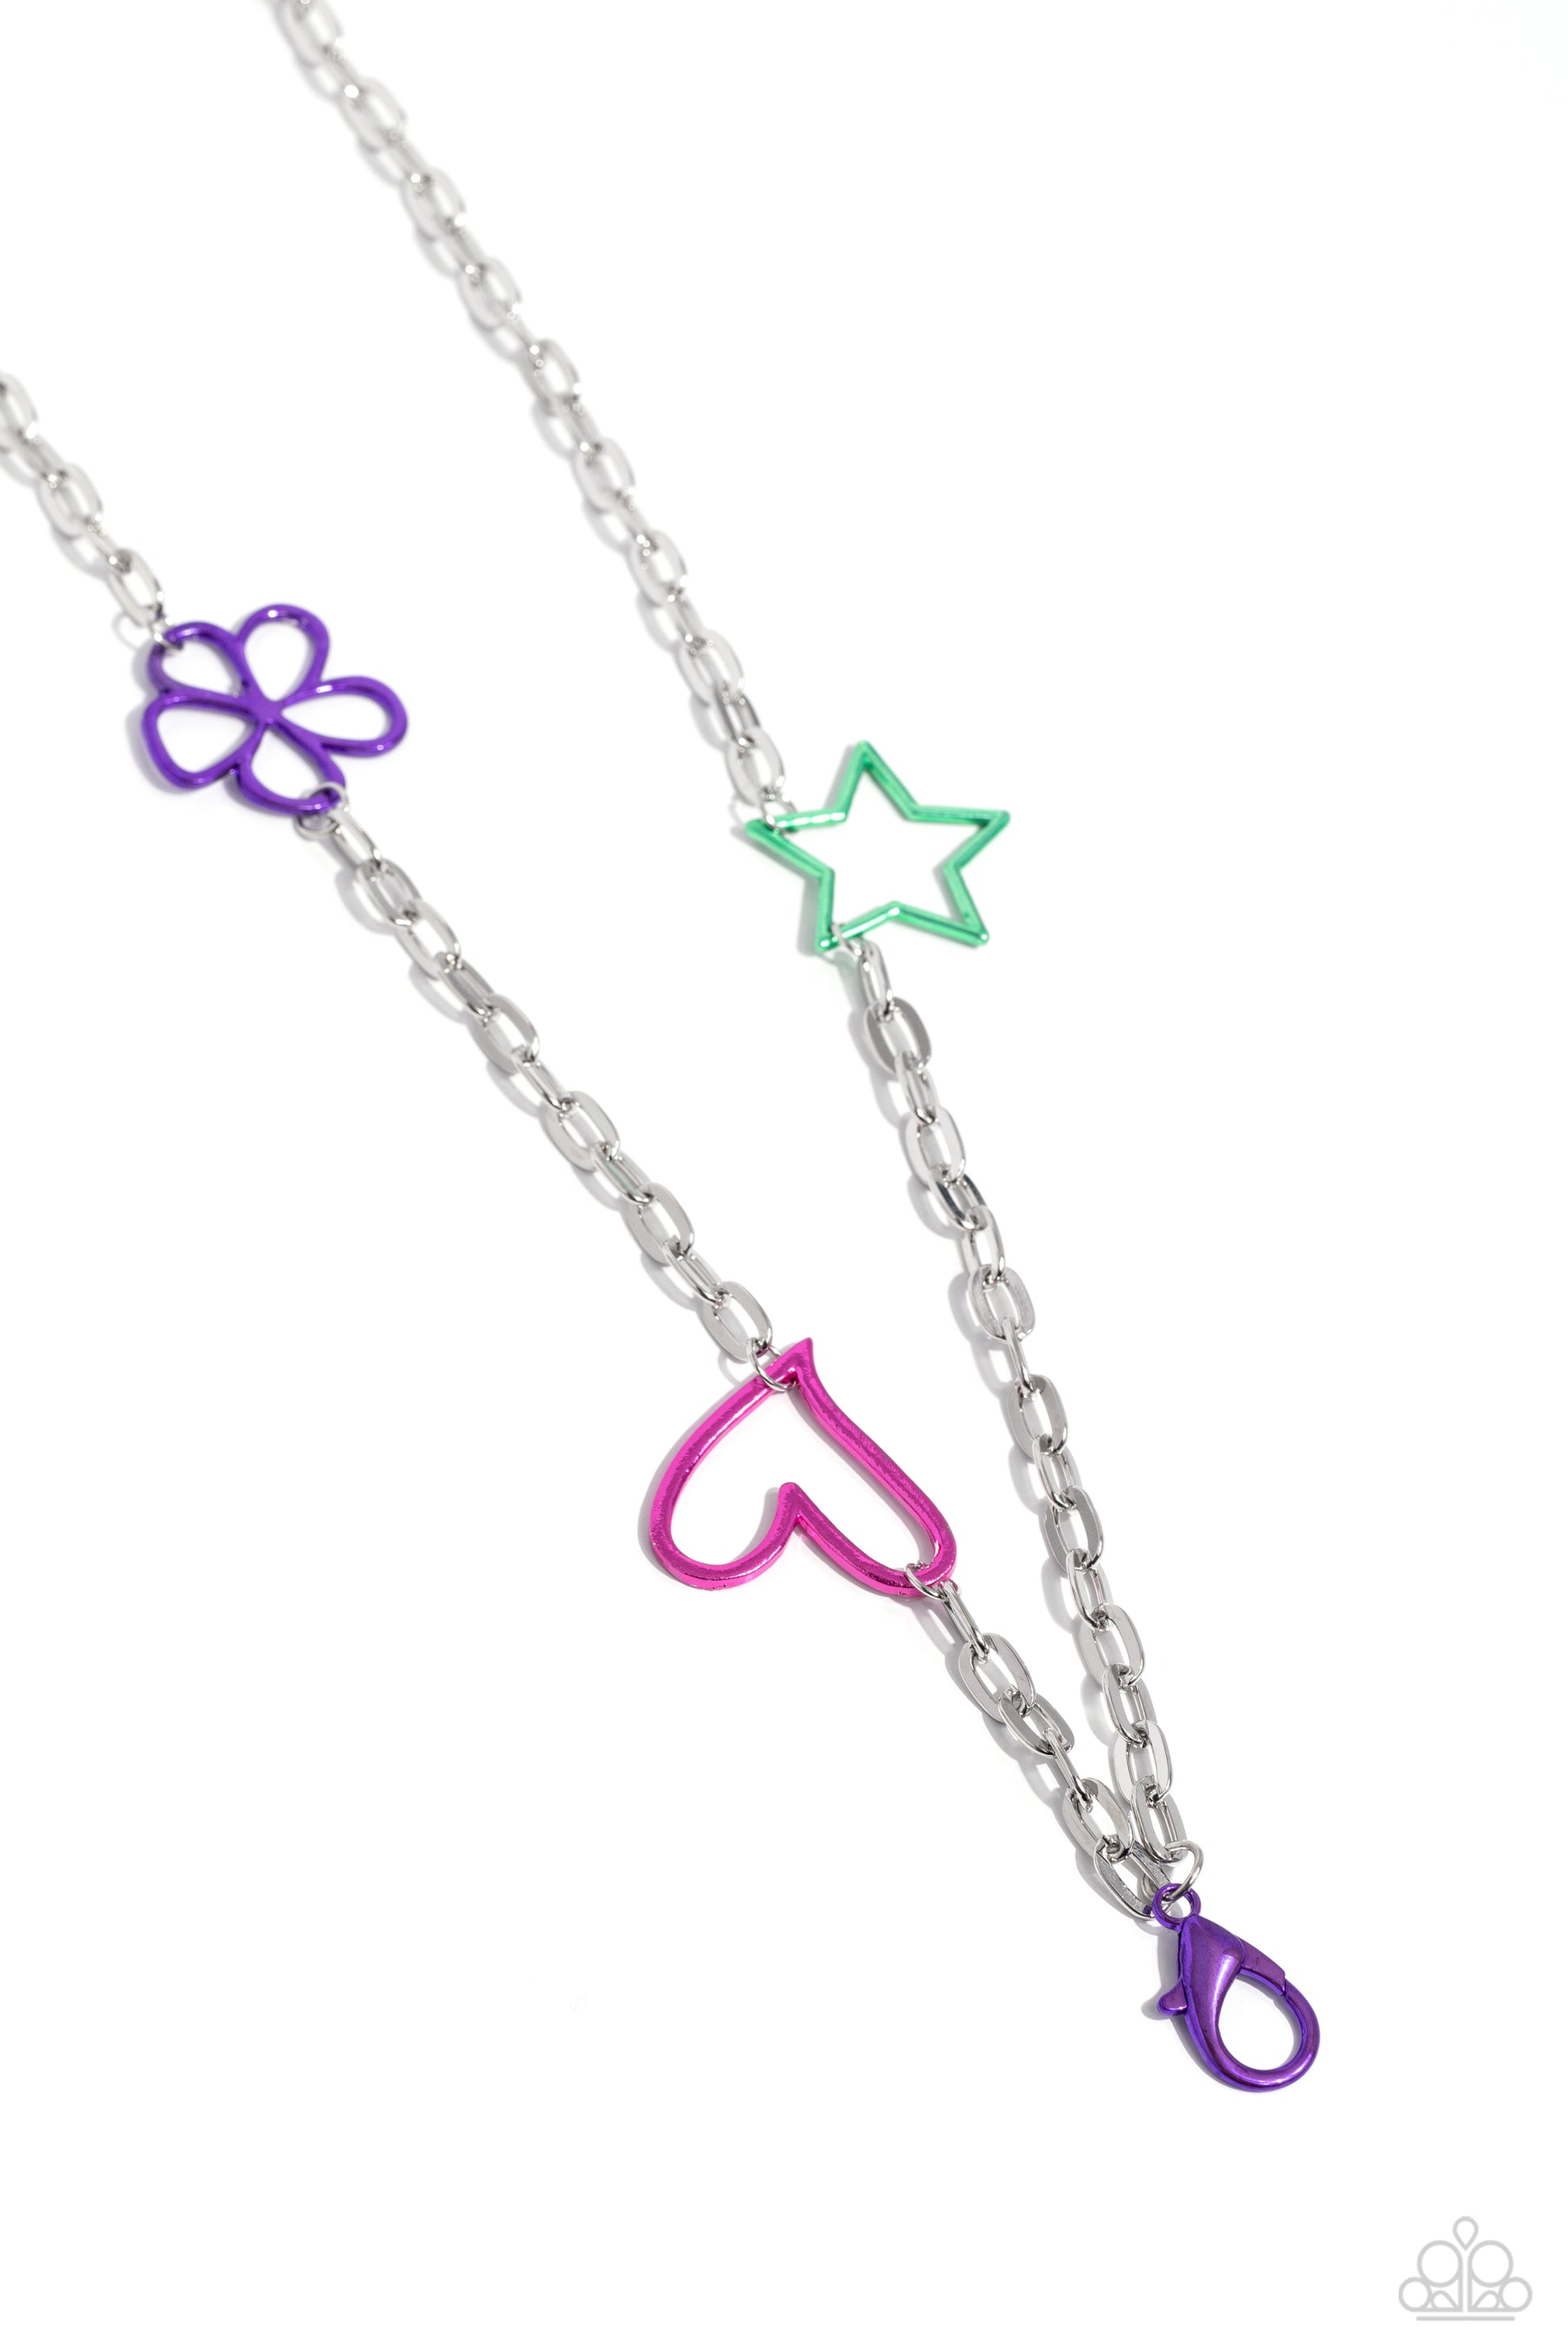 Shape the Future Purple Lanyard - Paparazzi Accessories  Infused along an elongated silver paperclip chain, a metallic-dipped green star, purple flower, and pink heart all lead the eye down the chest for a youthful finish. A metallic purple lobster clasp hangs from the bottom of the design to allow a name badge or other item to be attached. Features an adjustable clasp closure.  Sold as one individual lanyard. Includes one pair of matching earrings.  P2LN-PRXX-026XX